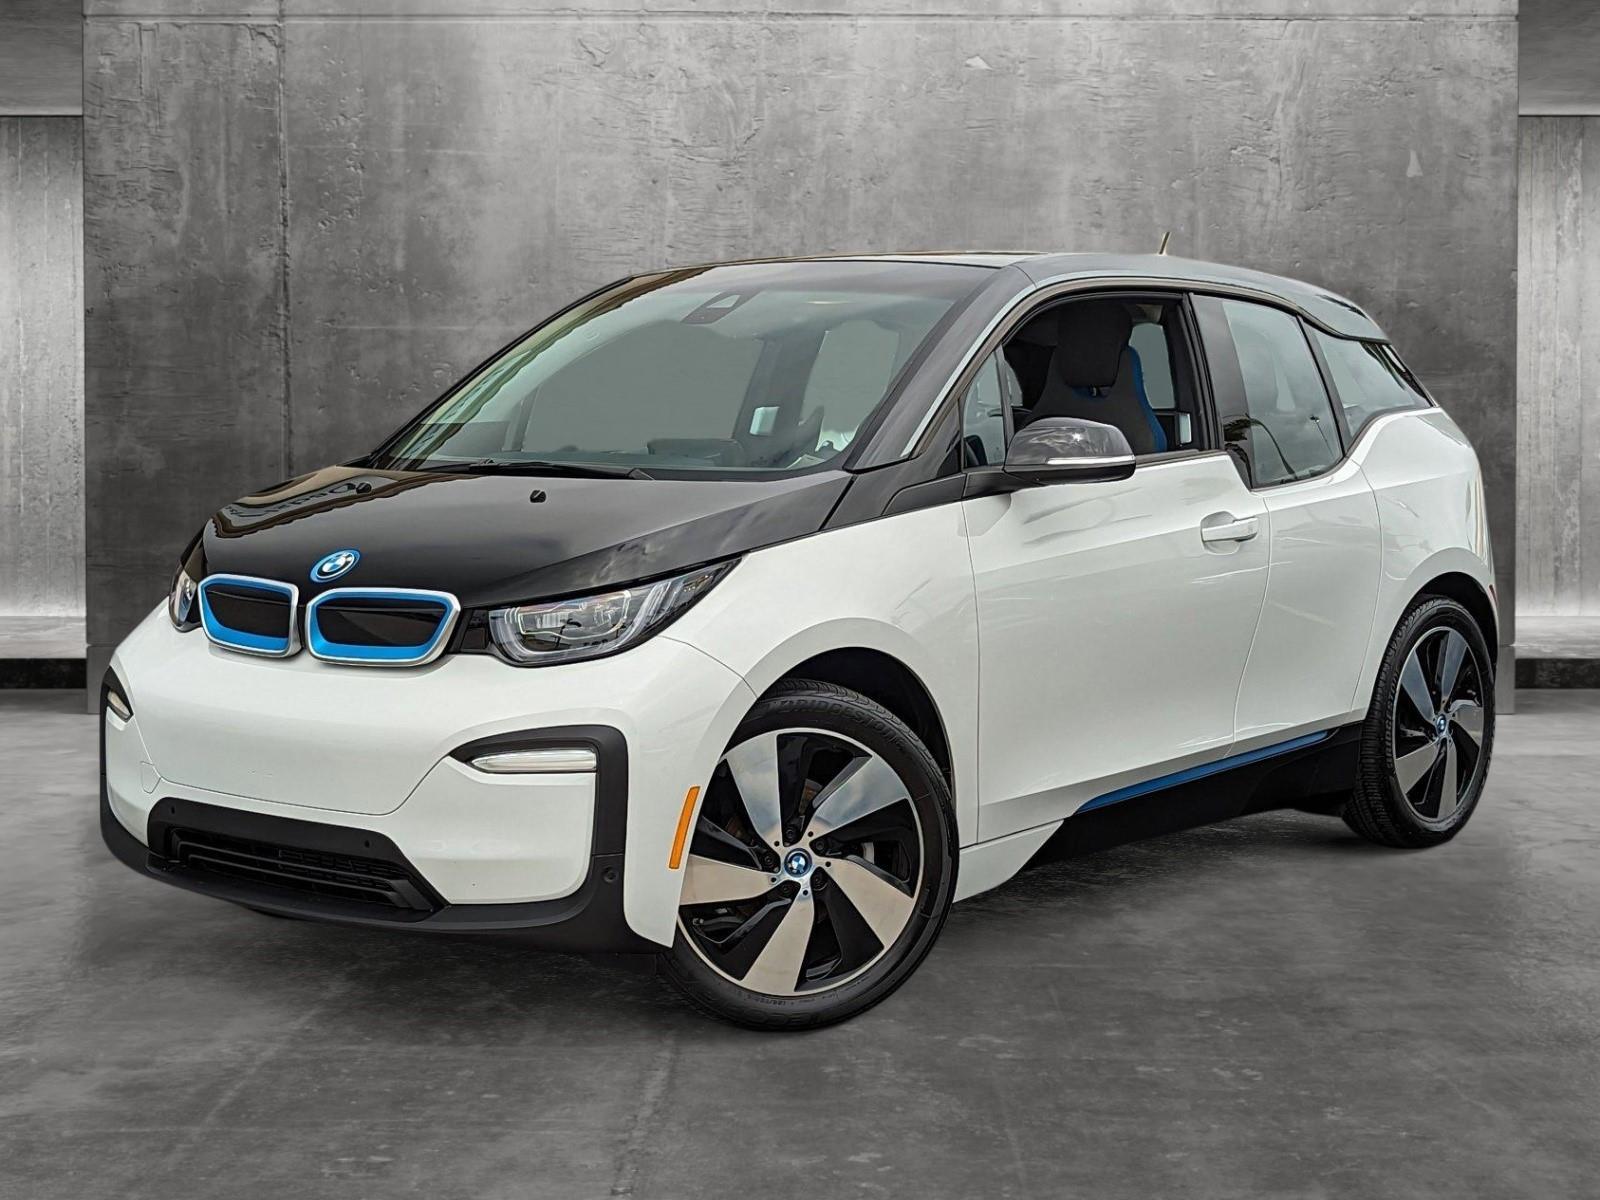 USED 2020 BMW i3 for sale in Carlsbad, CA 92008 - AutoNation